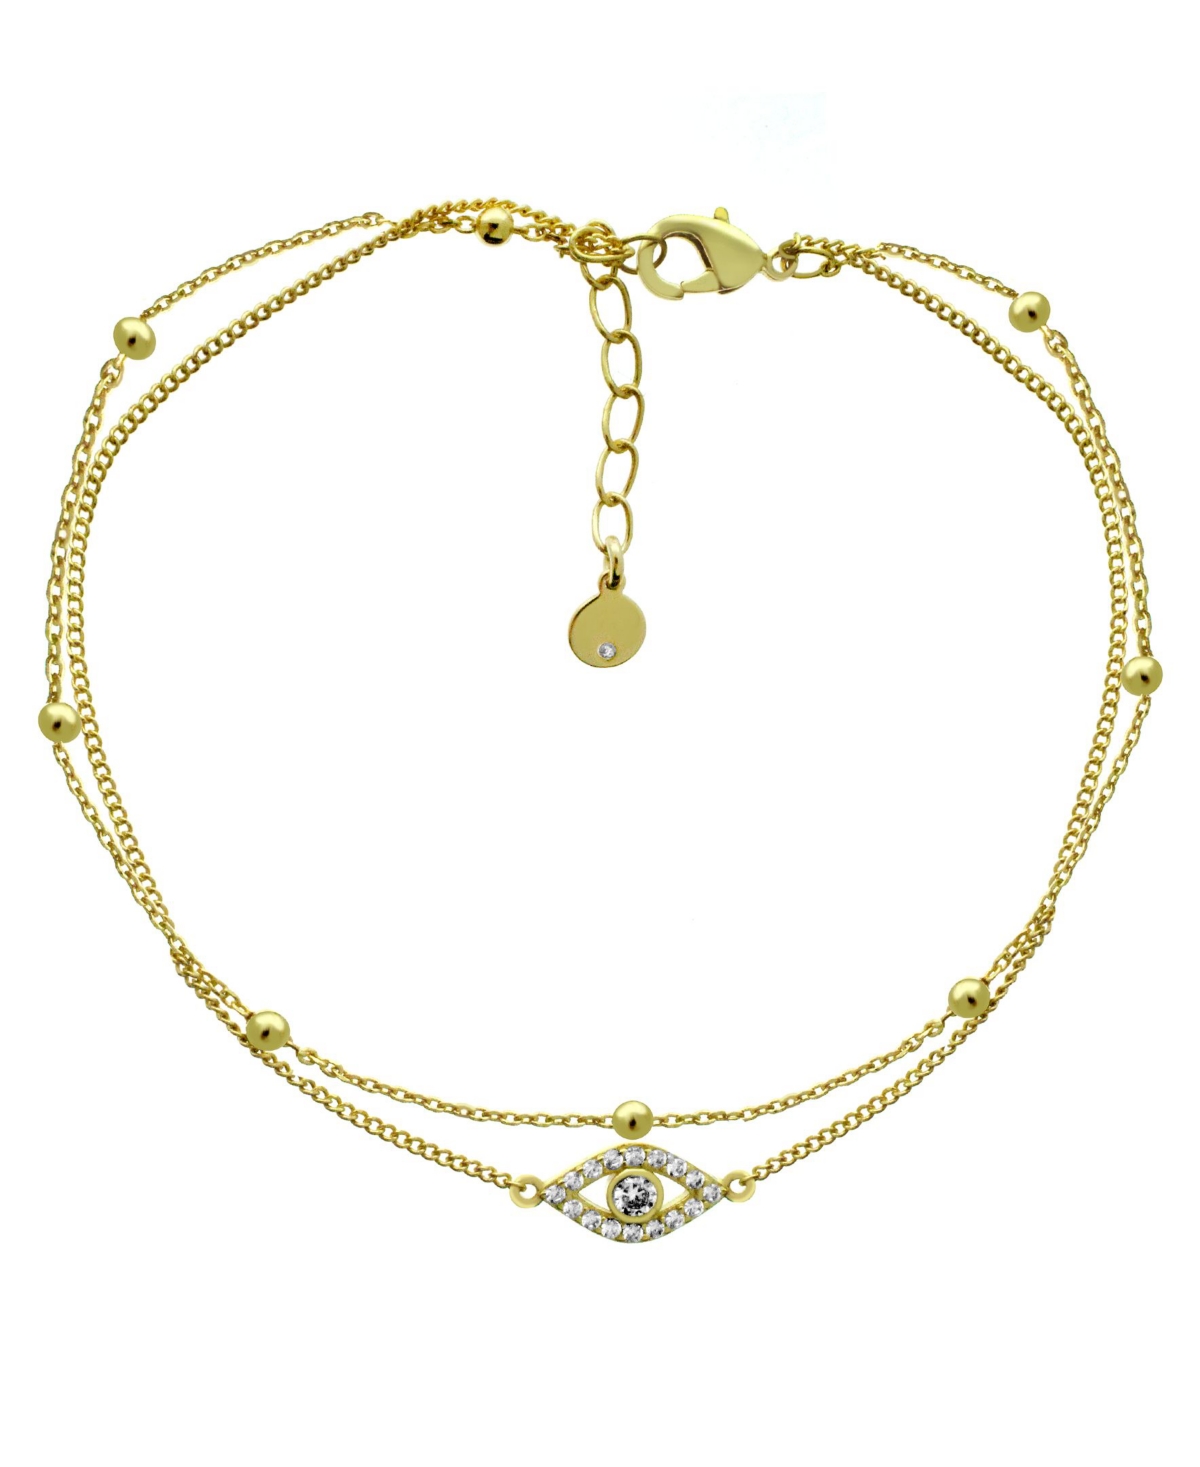 Evil Eye Double Chain Anklet in Gold Plate - Gold